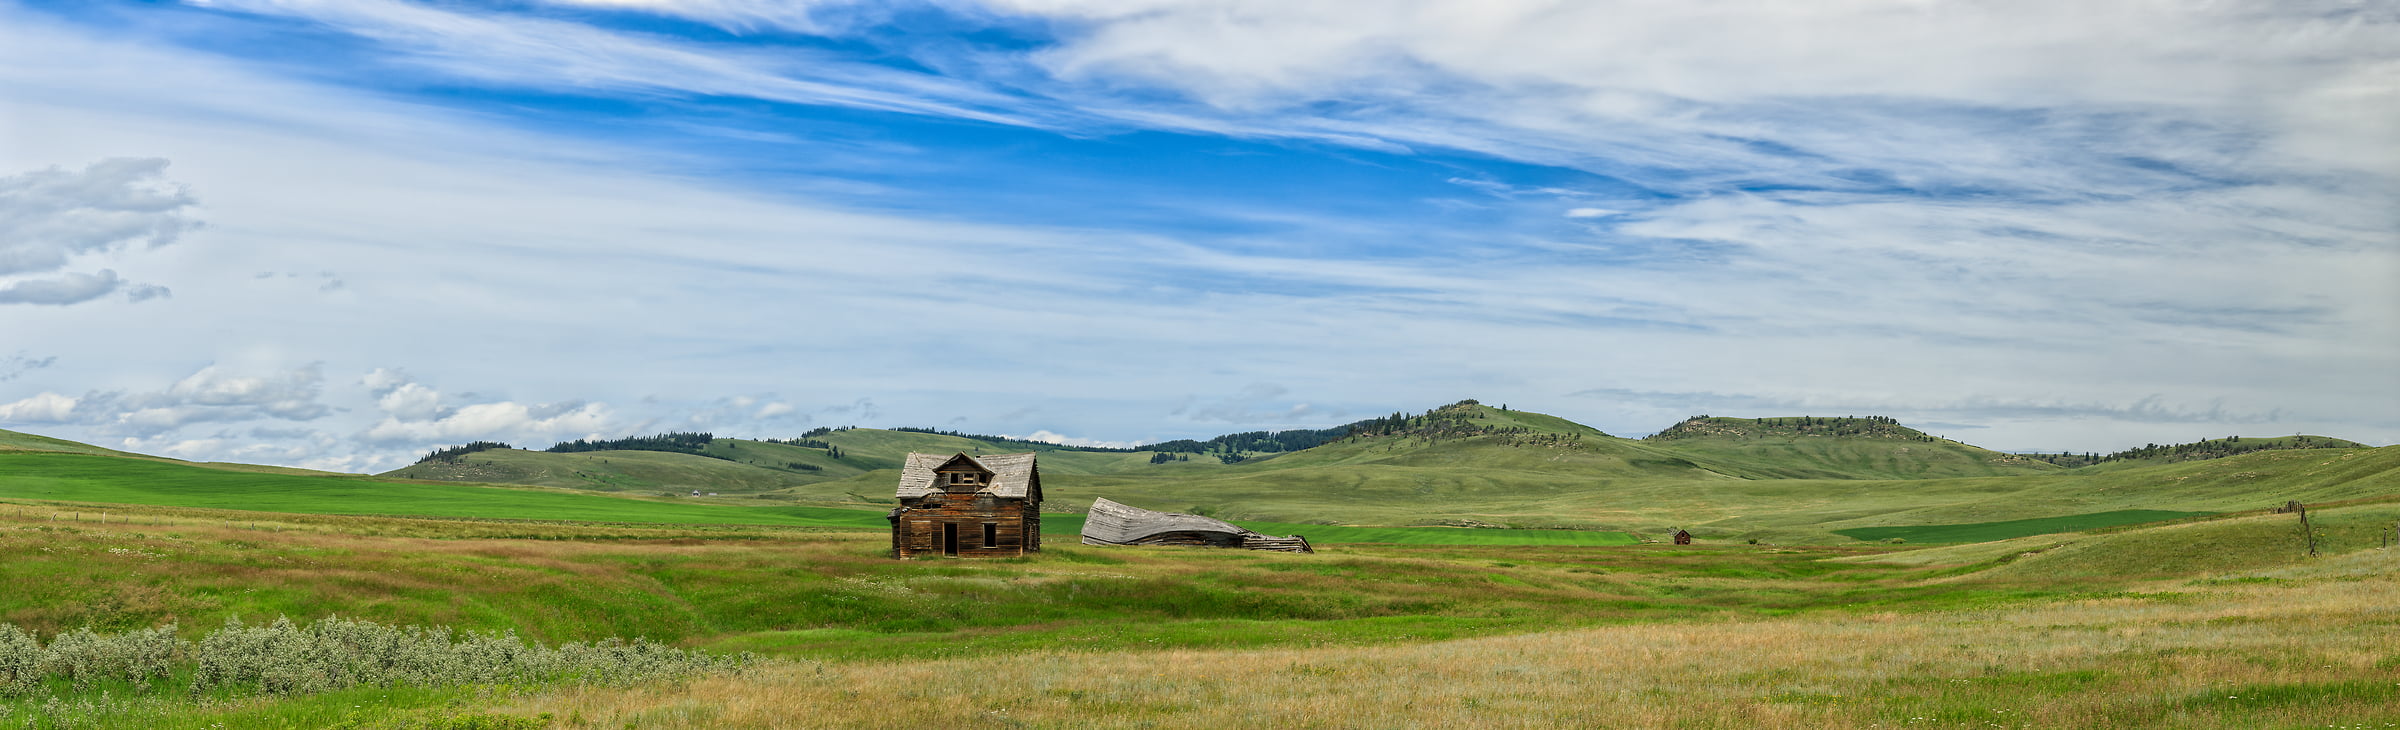 232 megapixels! A very high resolution, large-format VAST photo print of a house on a prairie; landscape photograph created by Scott Dimond in Pincher Creek No. 9, Alberta, Canada